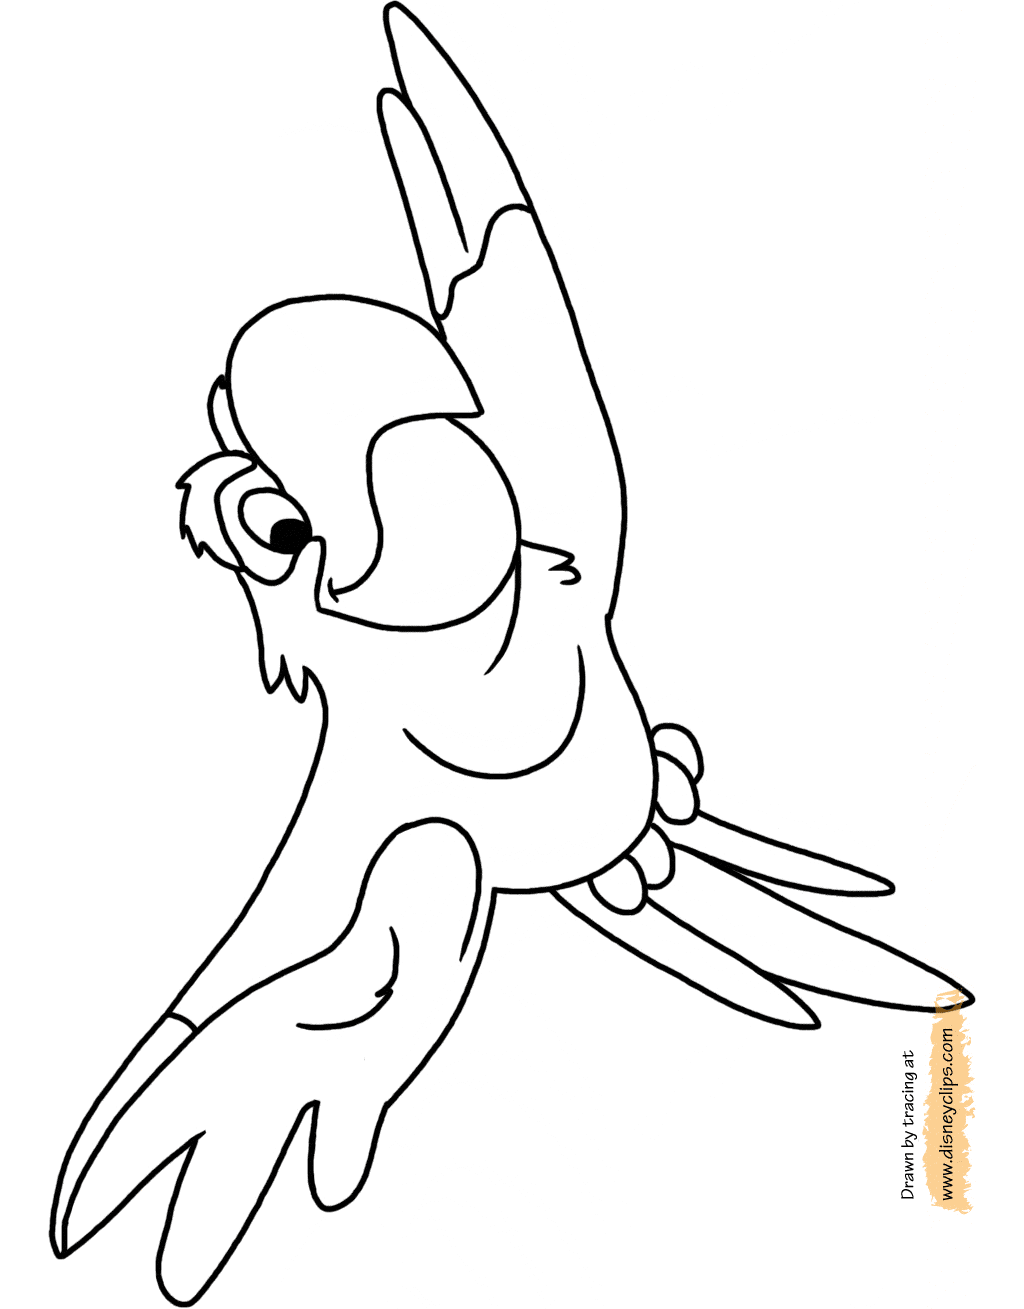 Download Aladdin Coloring Pages (5) | Disneyclips.com